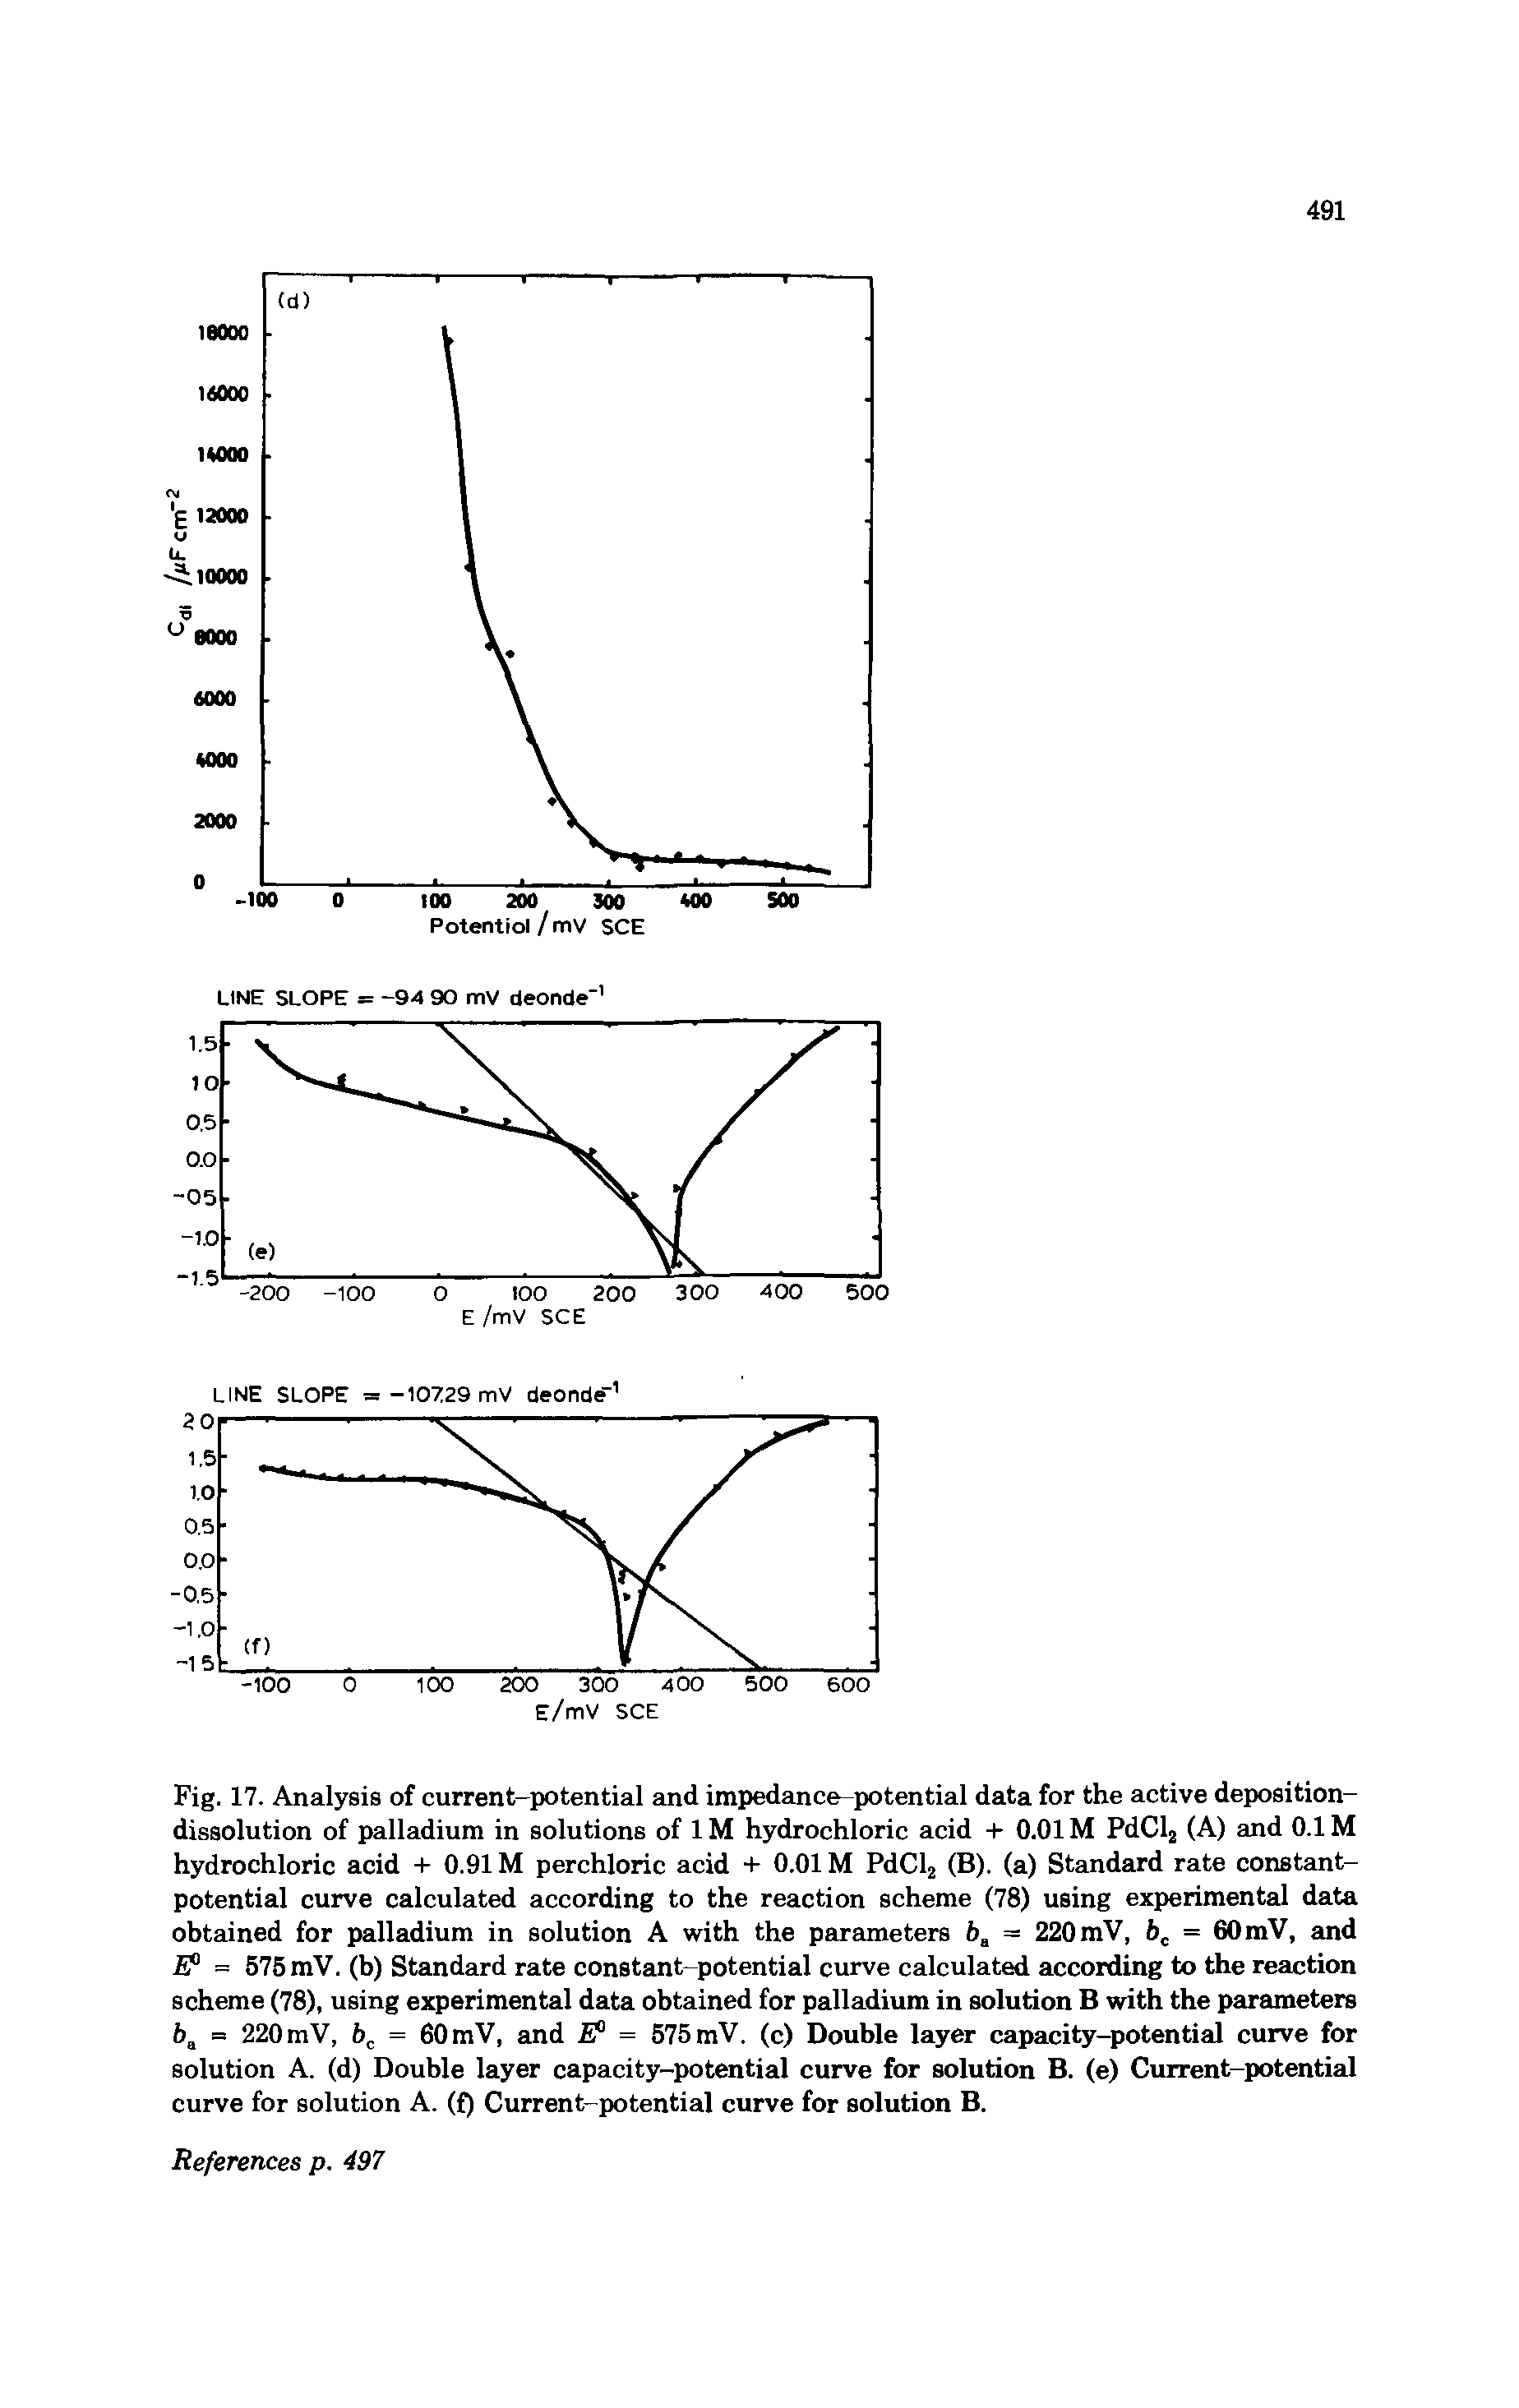 Fig. 17. Analysis of current-potential and impedance-potential data for the active deposition-dissolution of palladium in solutions of 1M hydrochloric acid + 0.01 M PdCl2 (A) and 0.1 M hydrochloric acid + 0.91 M perchloric acid + 0.01 M PdCl2 (B). (a) Standard rate constant-potential curve calculated according to the reaction scheme (78) using experimental data obtained for palladium in solution A with the parameters i>a = 220 mV, 6C = 60 mV, and E° = 575 mV. (b) Standard rate constant-potential curve calculated according to the reaction scheme (78), using experimental data obtained for palladium in solution B with the parameters i>a = 220 mV, bc = 60 mV, and ° = 575 mV. (c) Double layer capacity-potential curve for solution A. (d) Double layer capacity-potential curve for solution B. (e) Current-potential curve for solution A. (f) Current-potential curve for solution B.